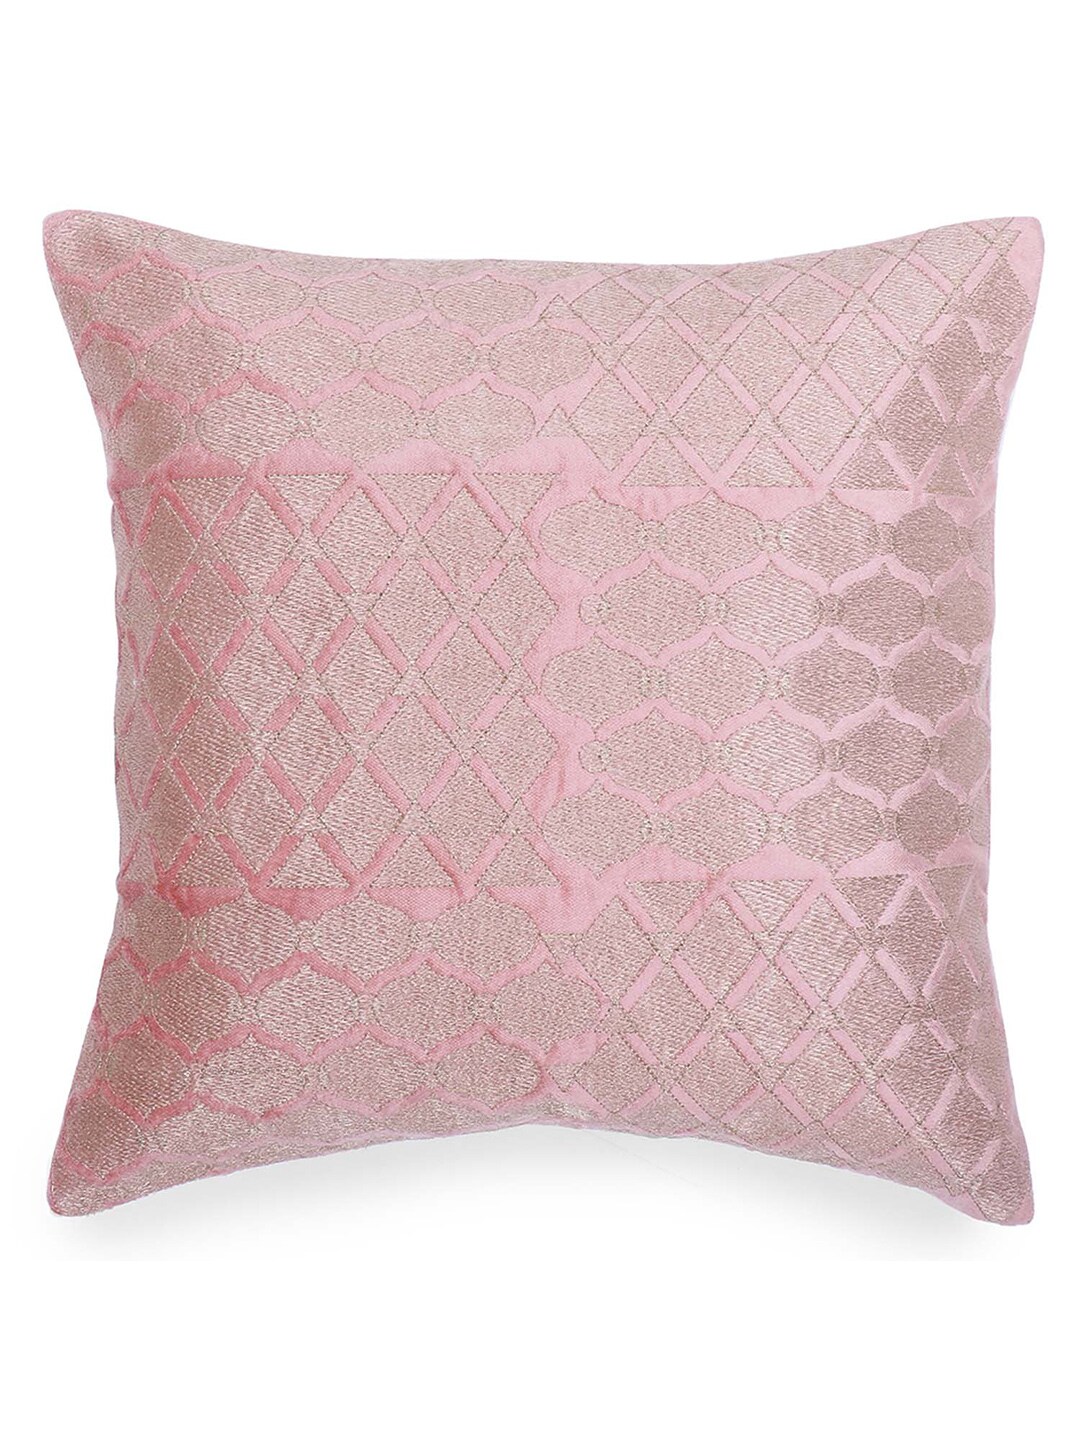 haus & kinder Pink & Gold-Toned Square Cushion Covers Price in India